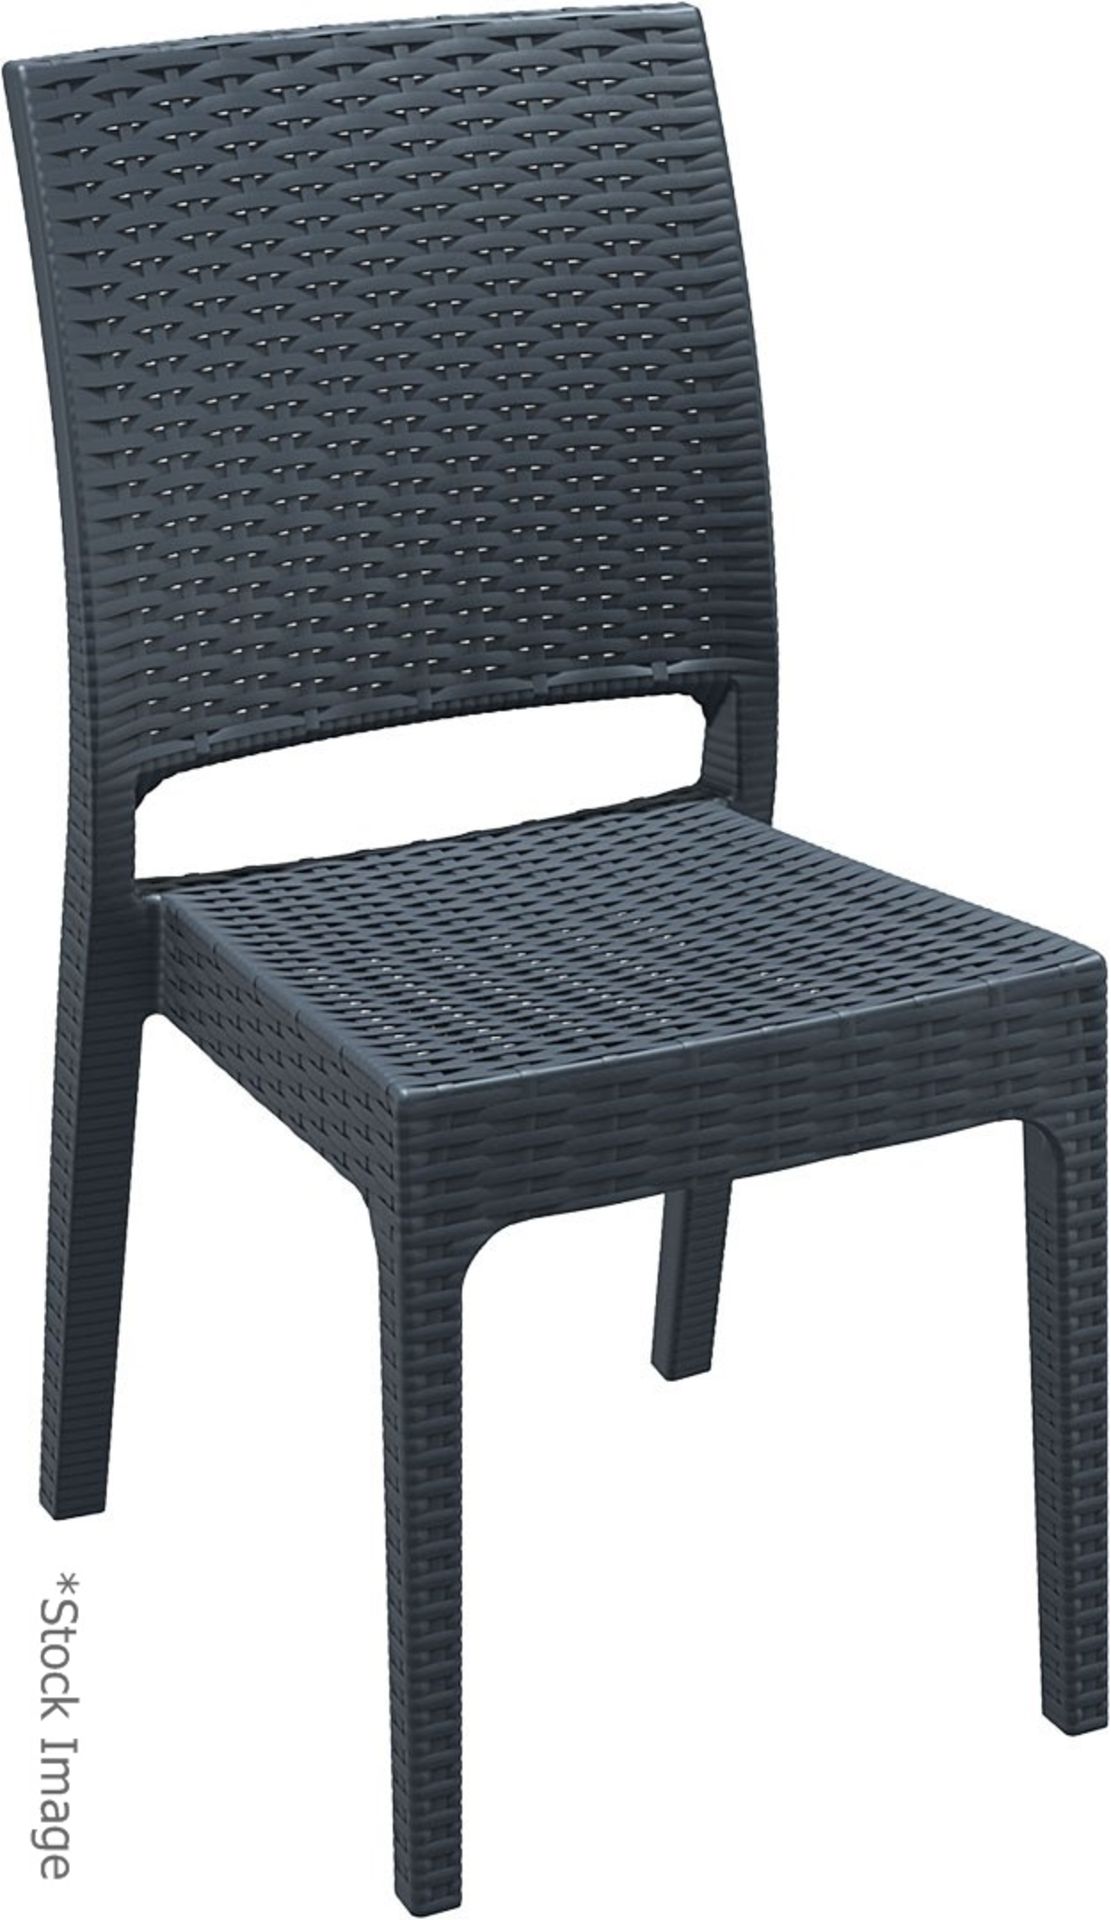 8 x SIESTA EXCLUSIVE 'Florida' Commercial Stackable Rattan-style Chairs In Dark Grey - Image 11 of 13